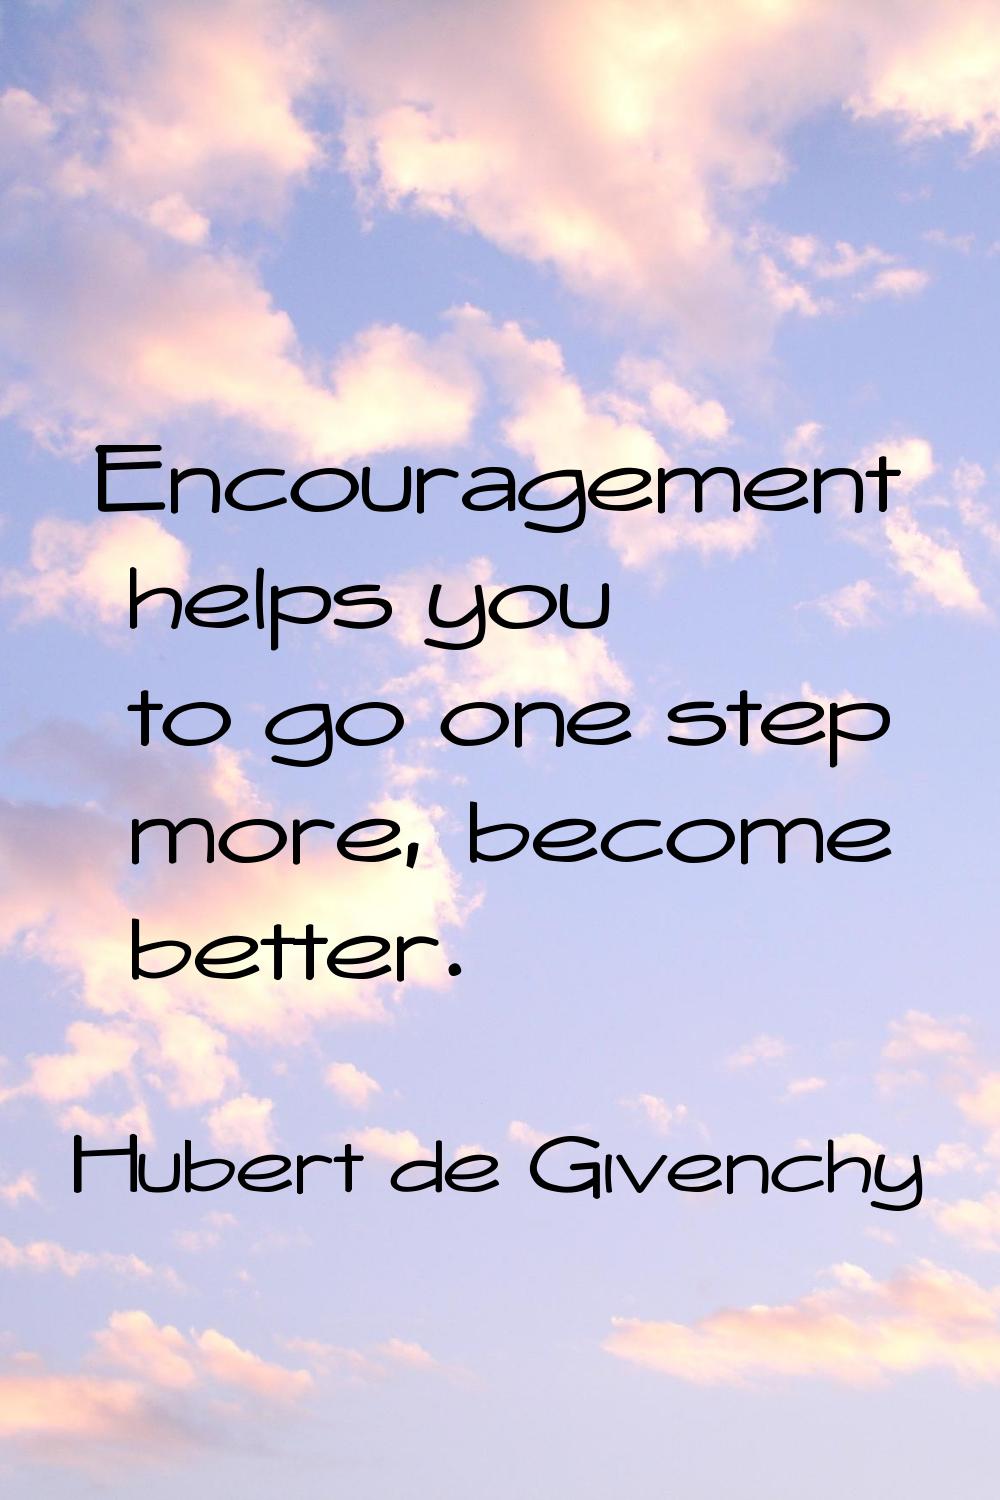 Encouragement helps you to go one step more, become better.